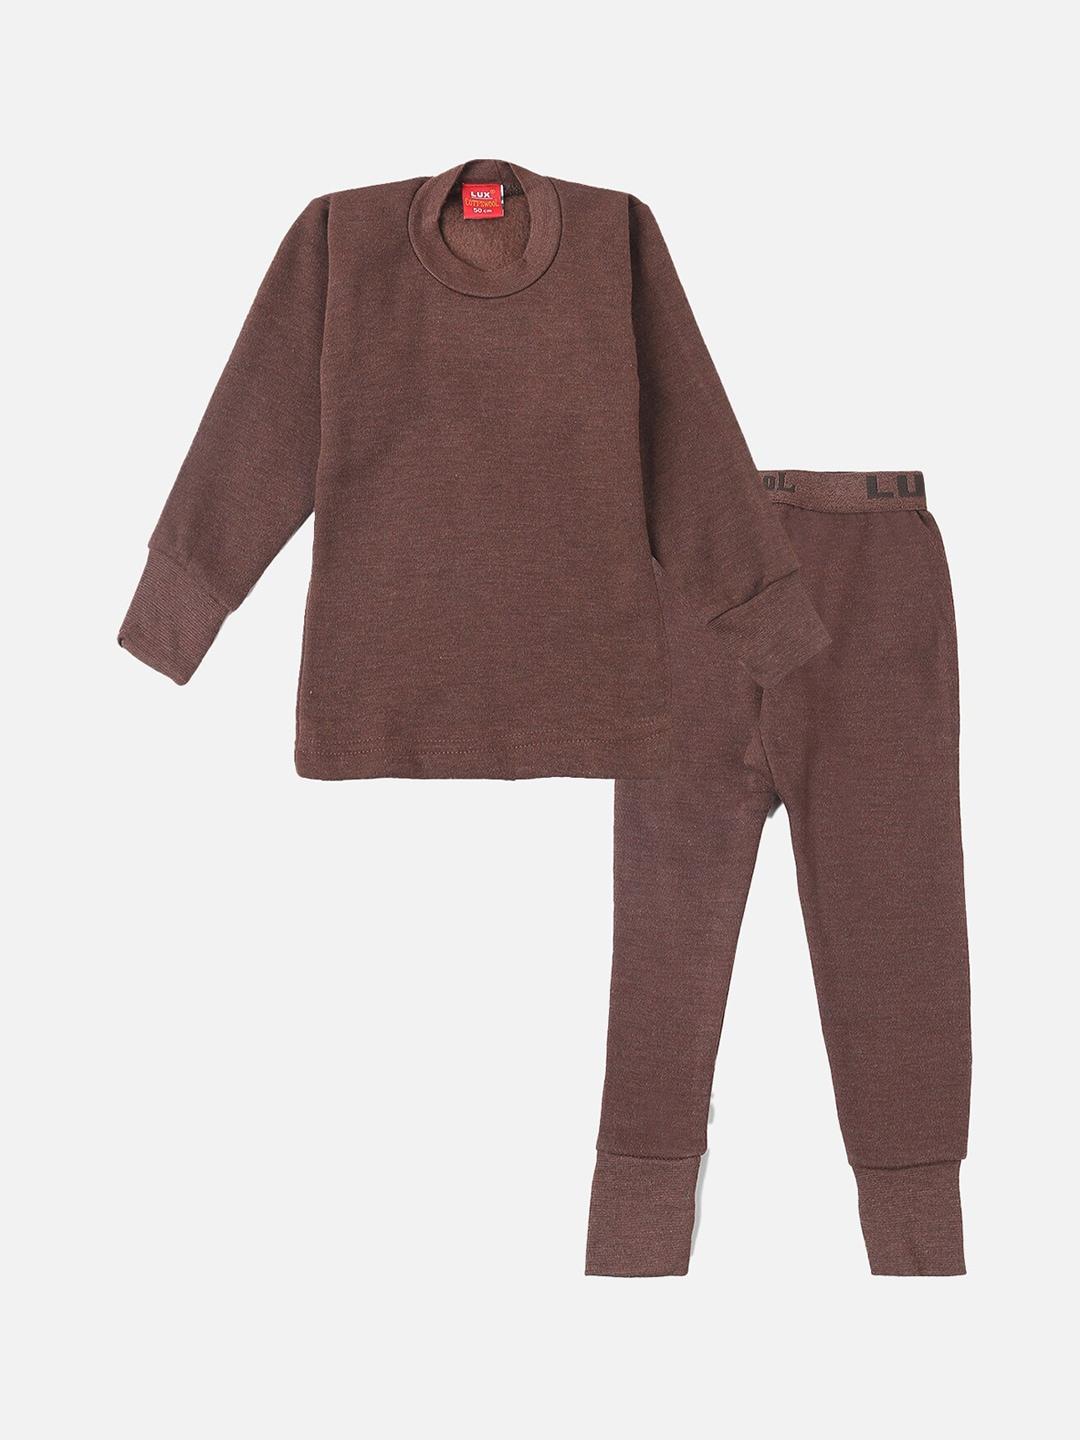 Lux Cottswool Boys Brown Solid Cotton Slim-Fit Thermal Set